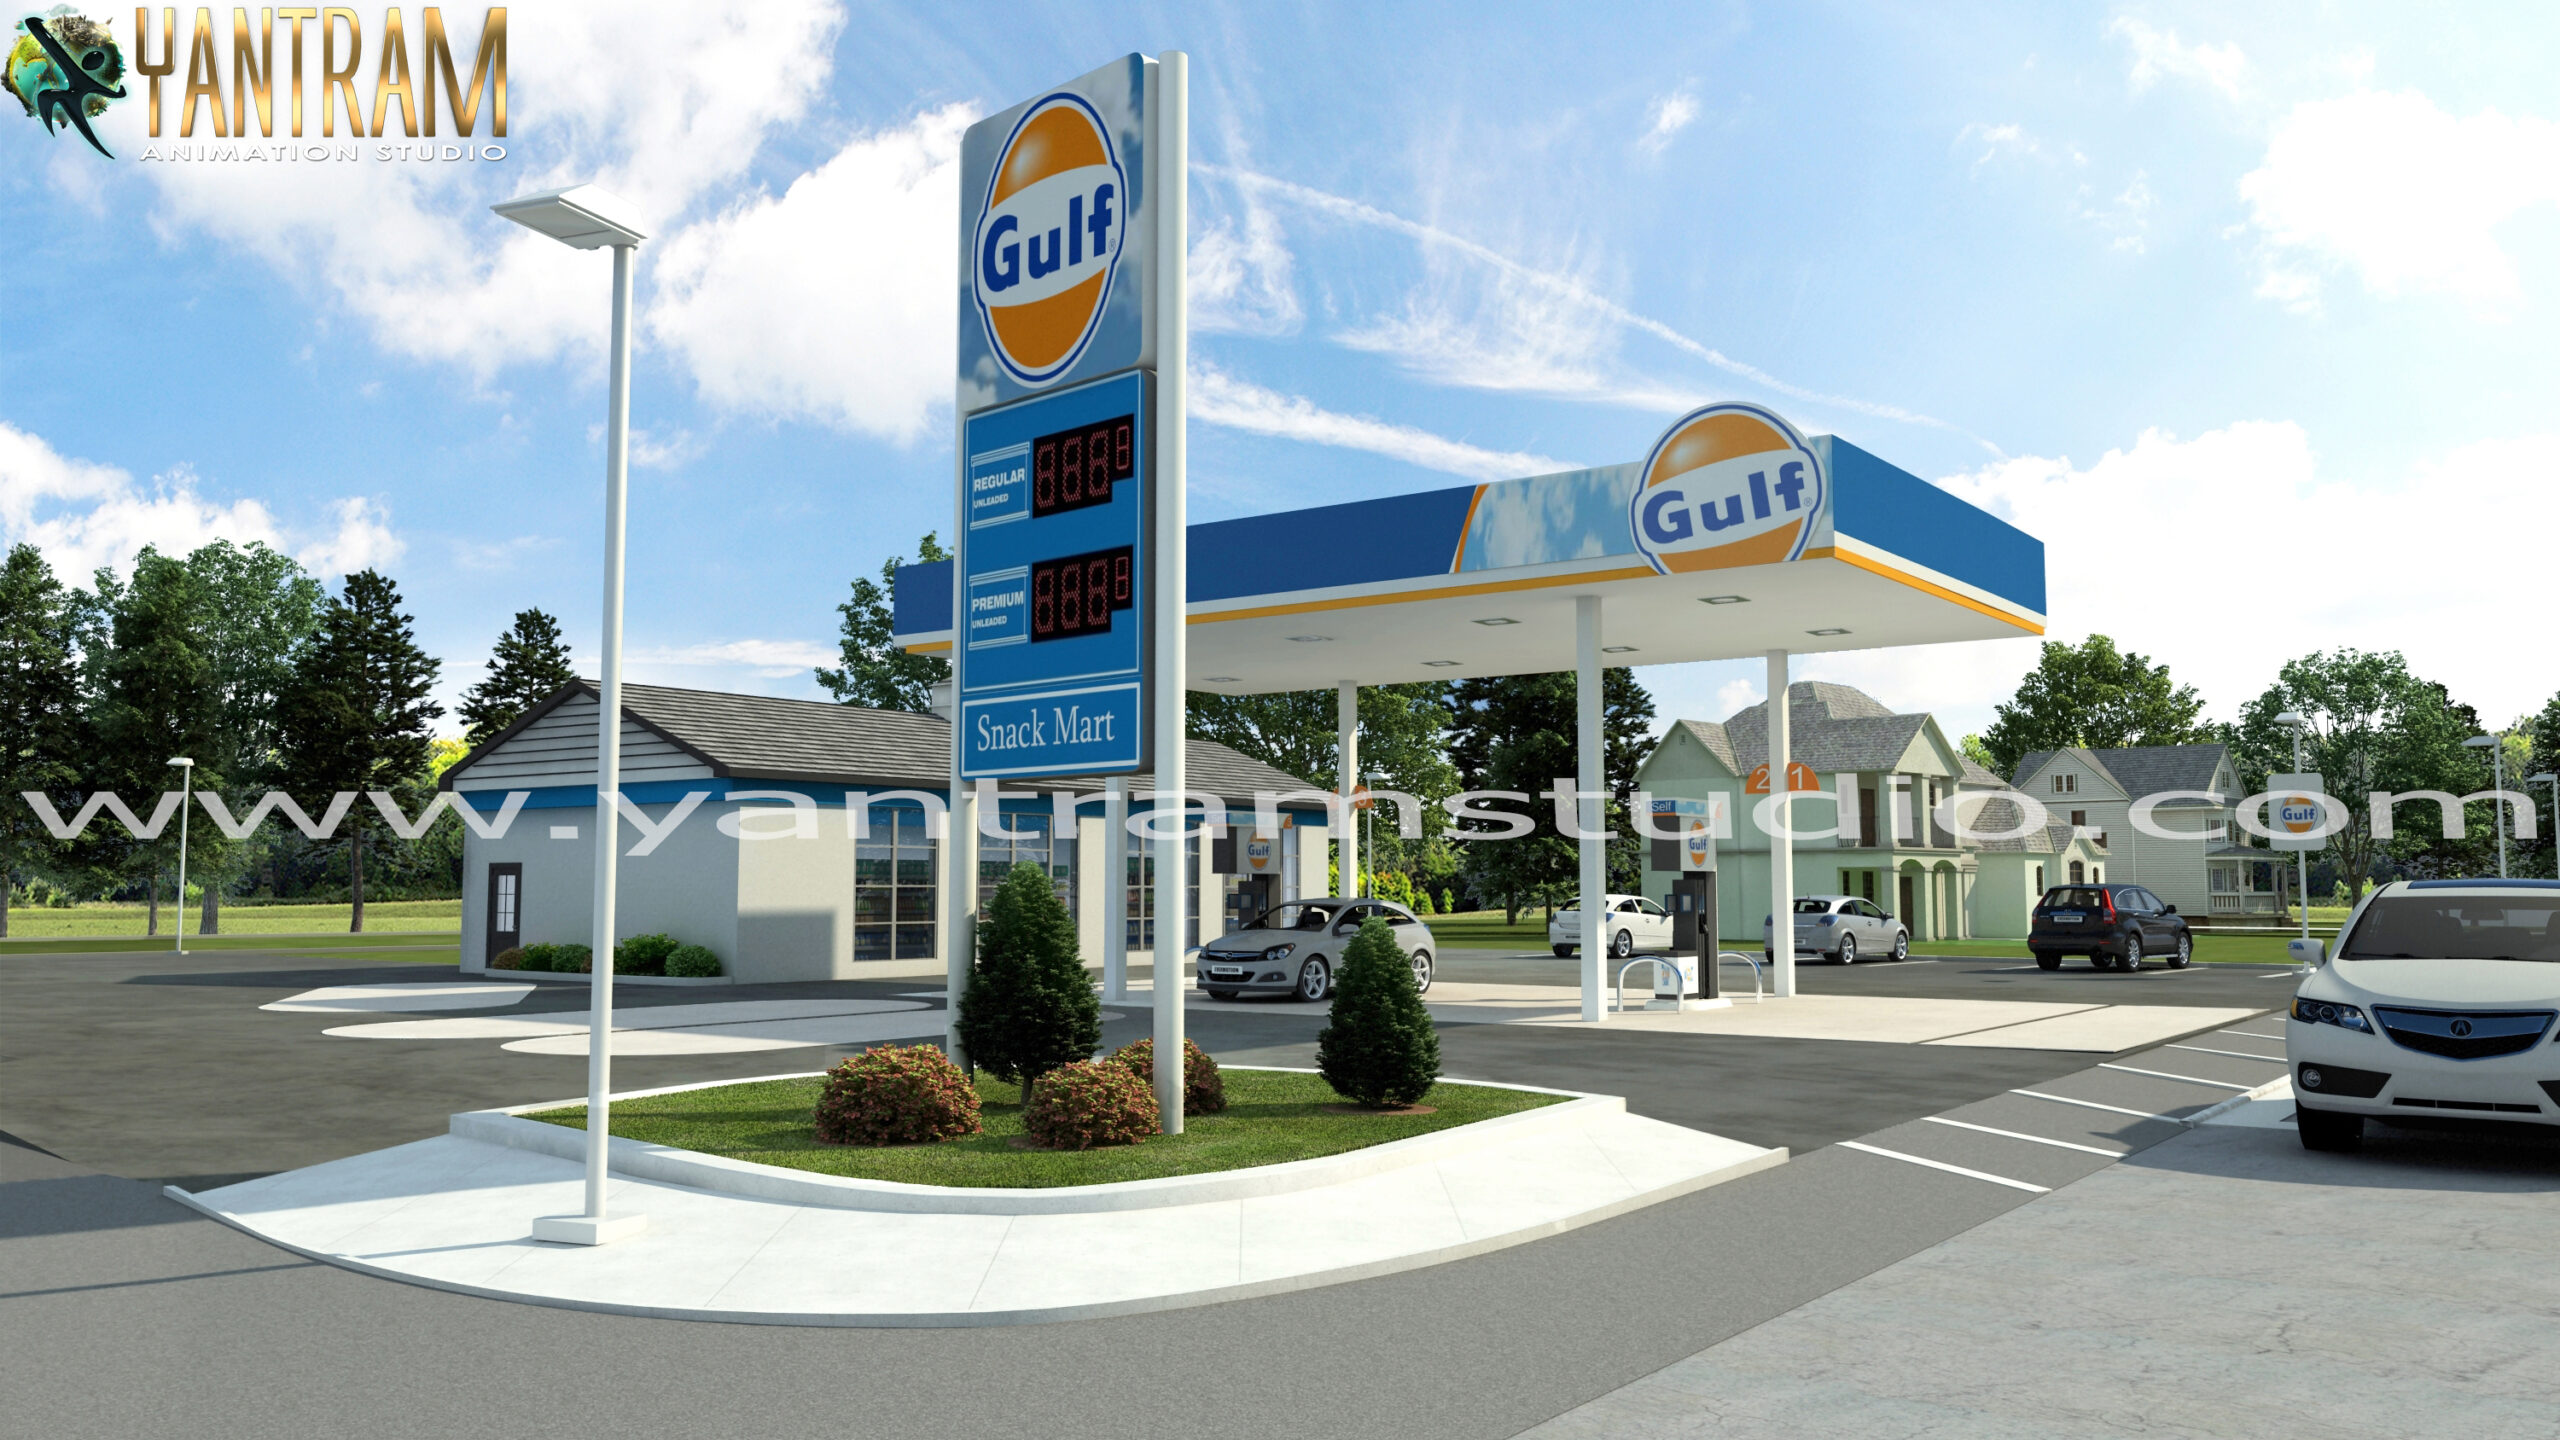 Gulf-Gas-Station-Car-by-yantram-architectural-rendering-service